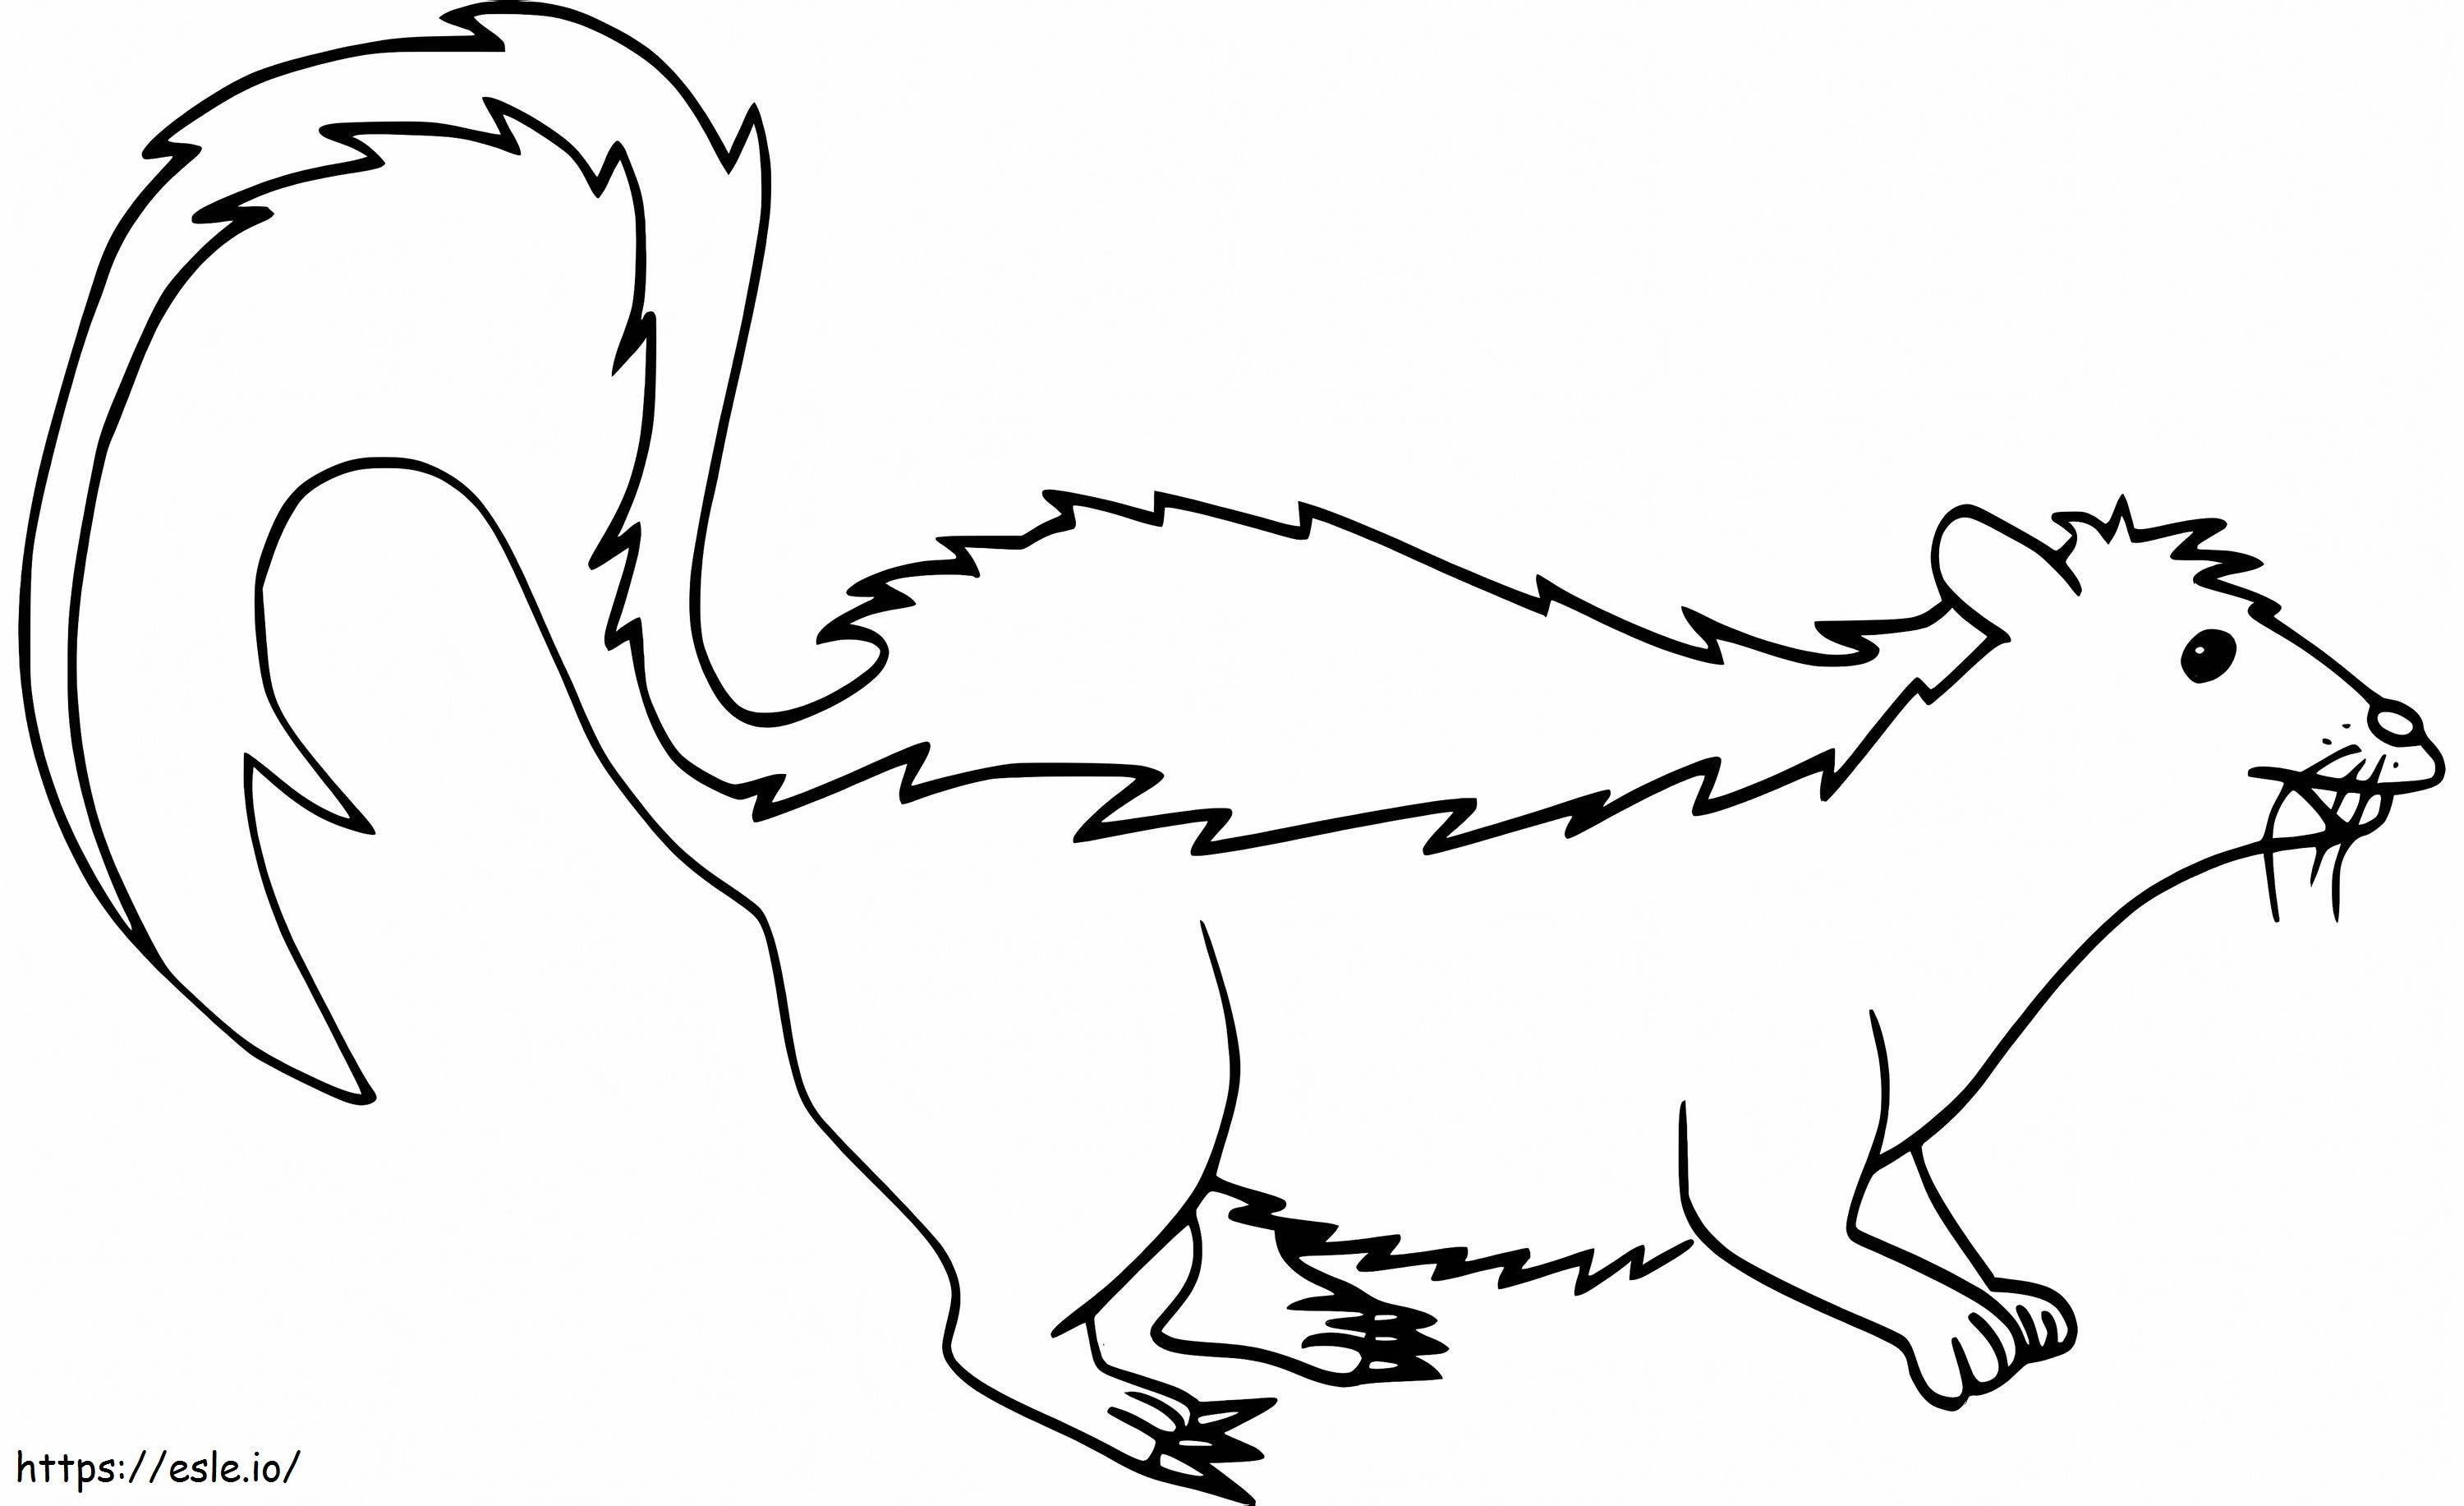 More Hognose coloring page